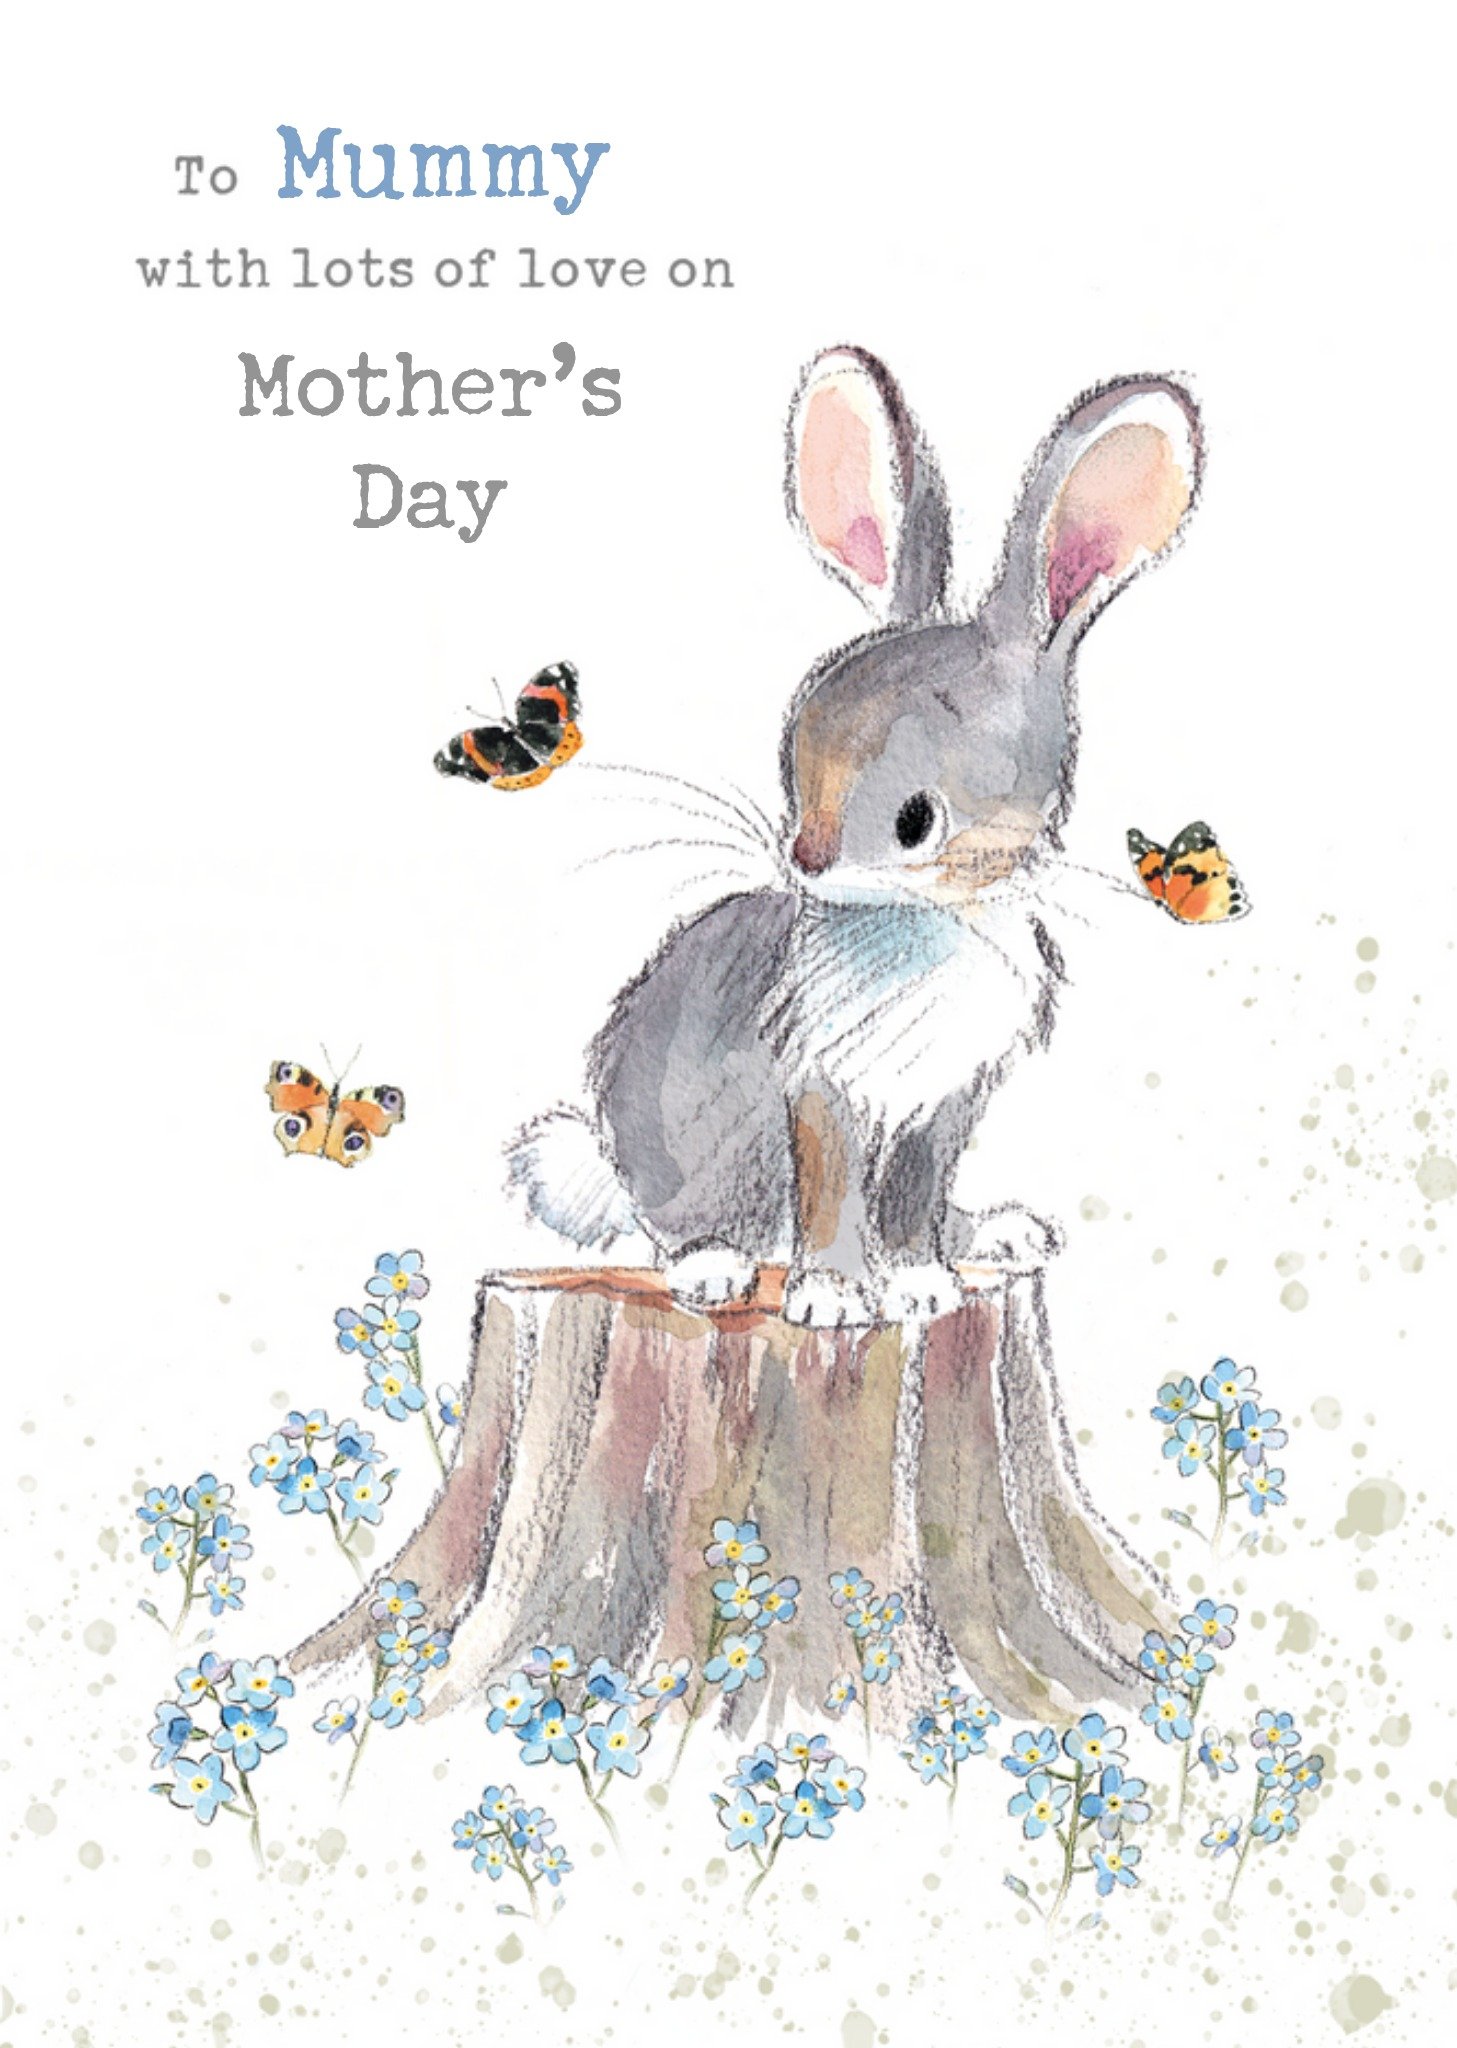 Moonpig Sweet Autumnal Illustrated Rabbit And Butterflies Lots Of Love On Mother's Day Card, Large